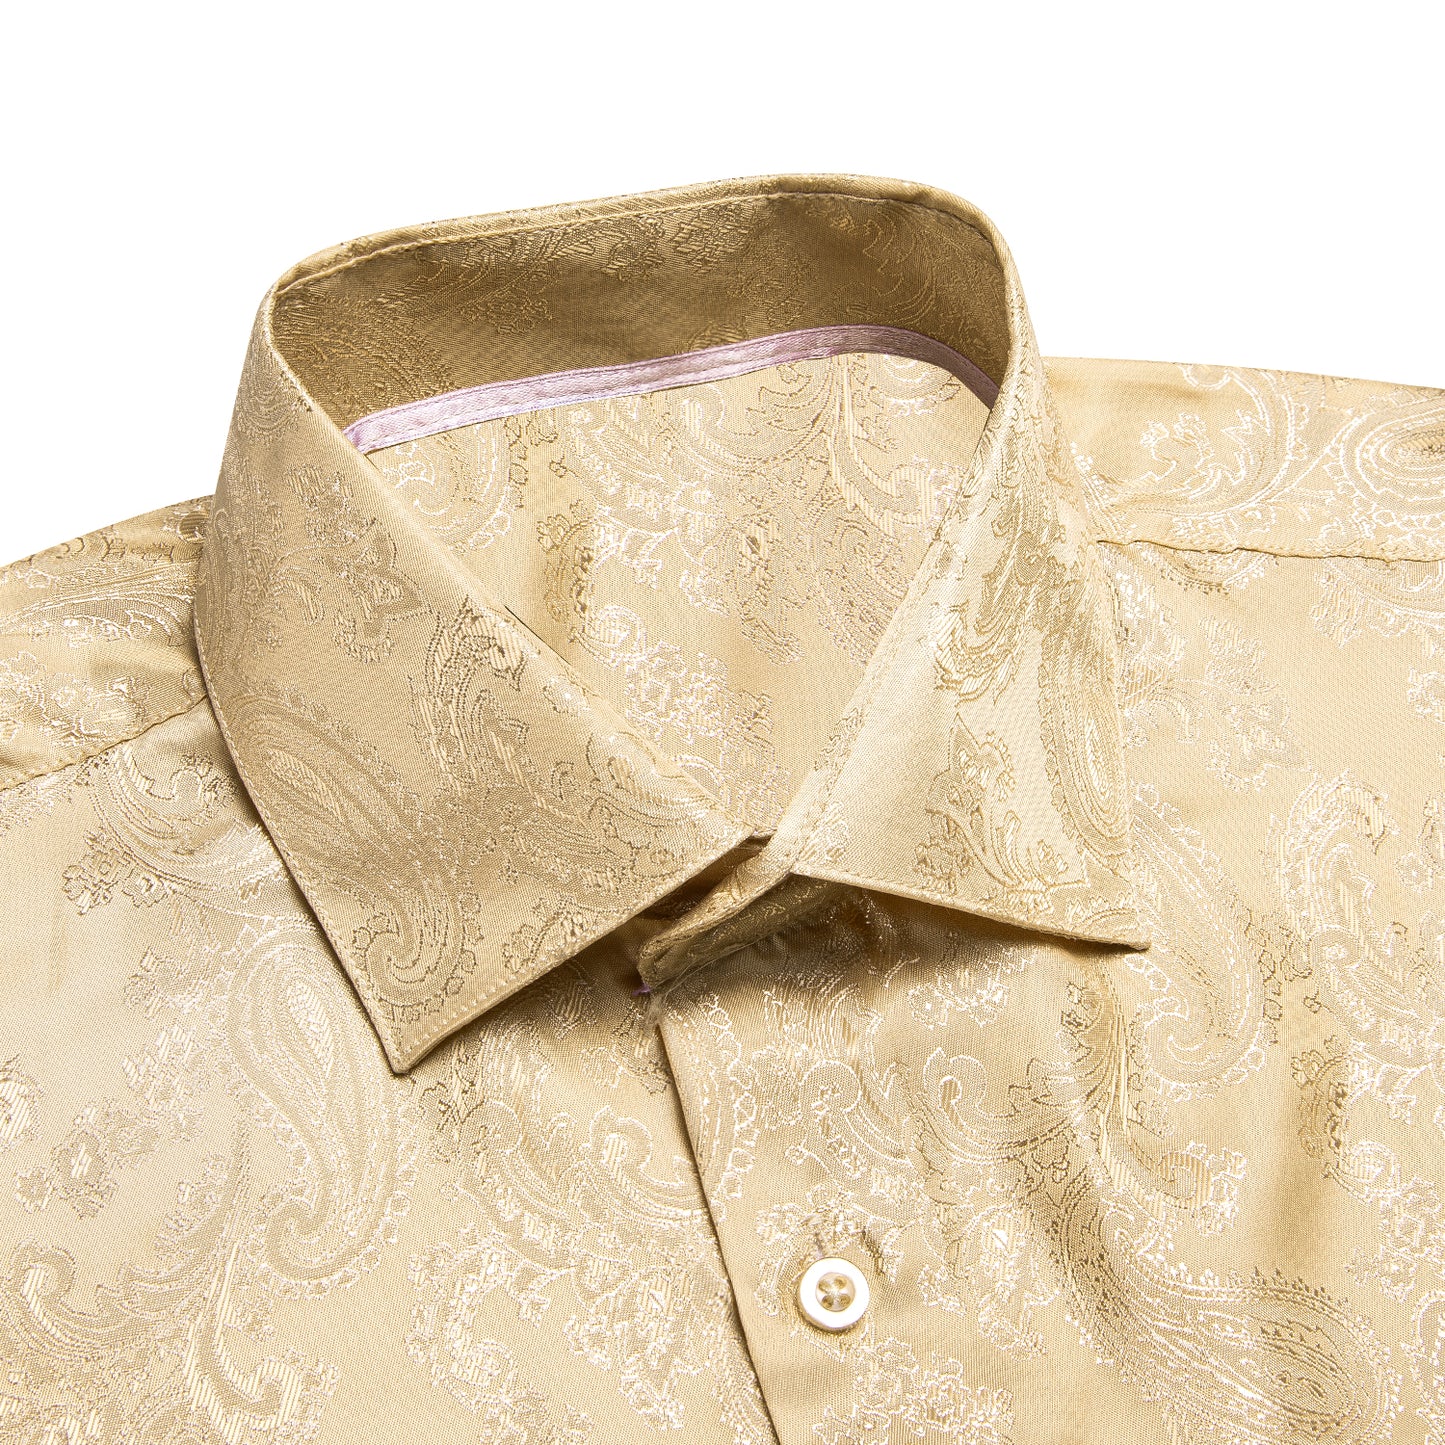 Novelty Silky Shirt - Champagne Nuts